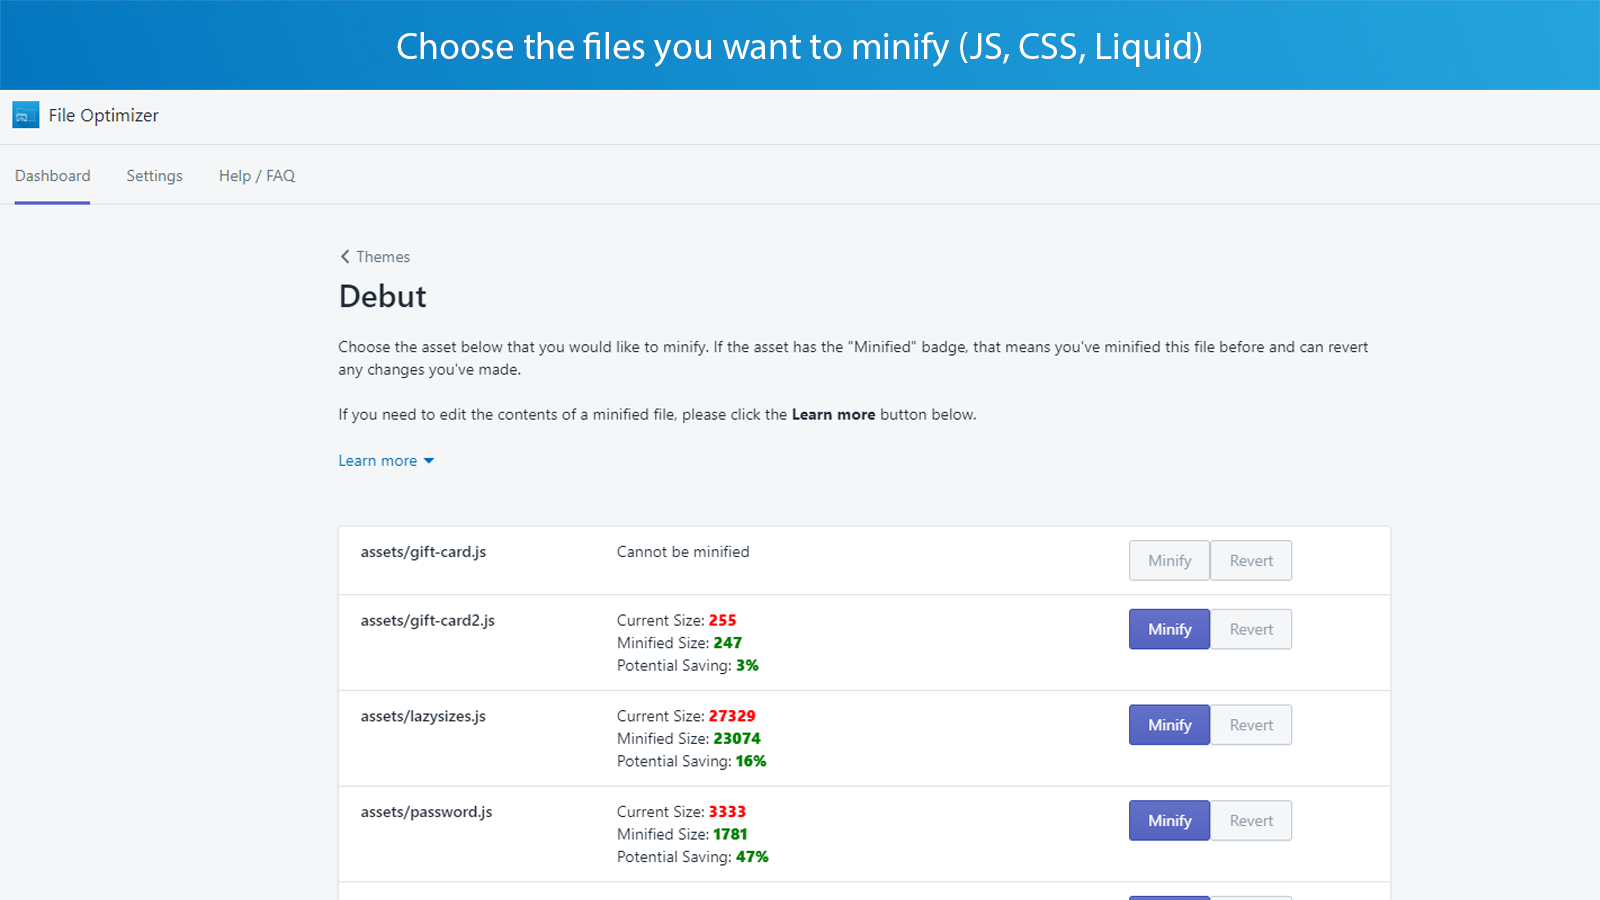 Pick and choose the files to minify, between JS, CSS, Liquid